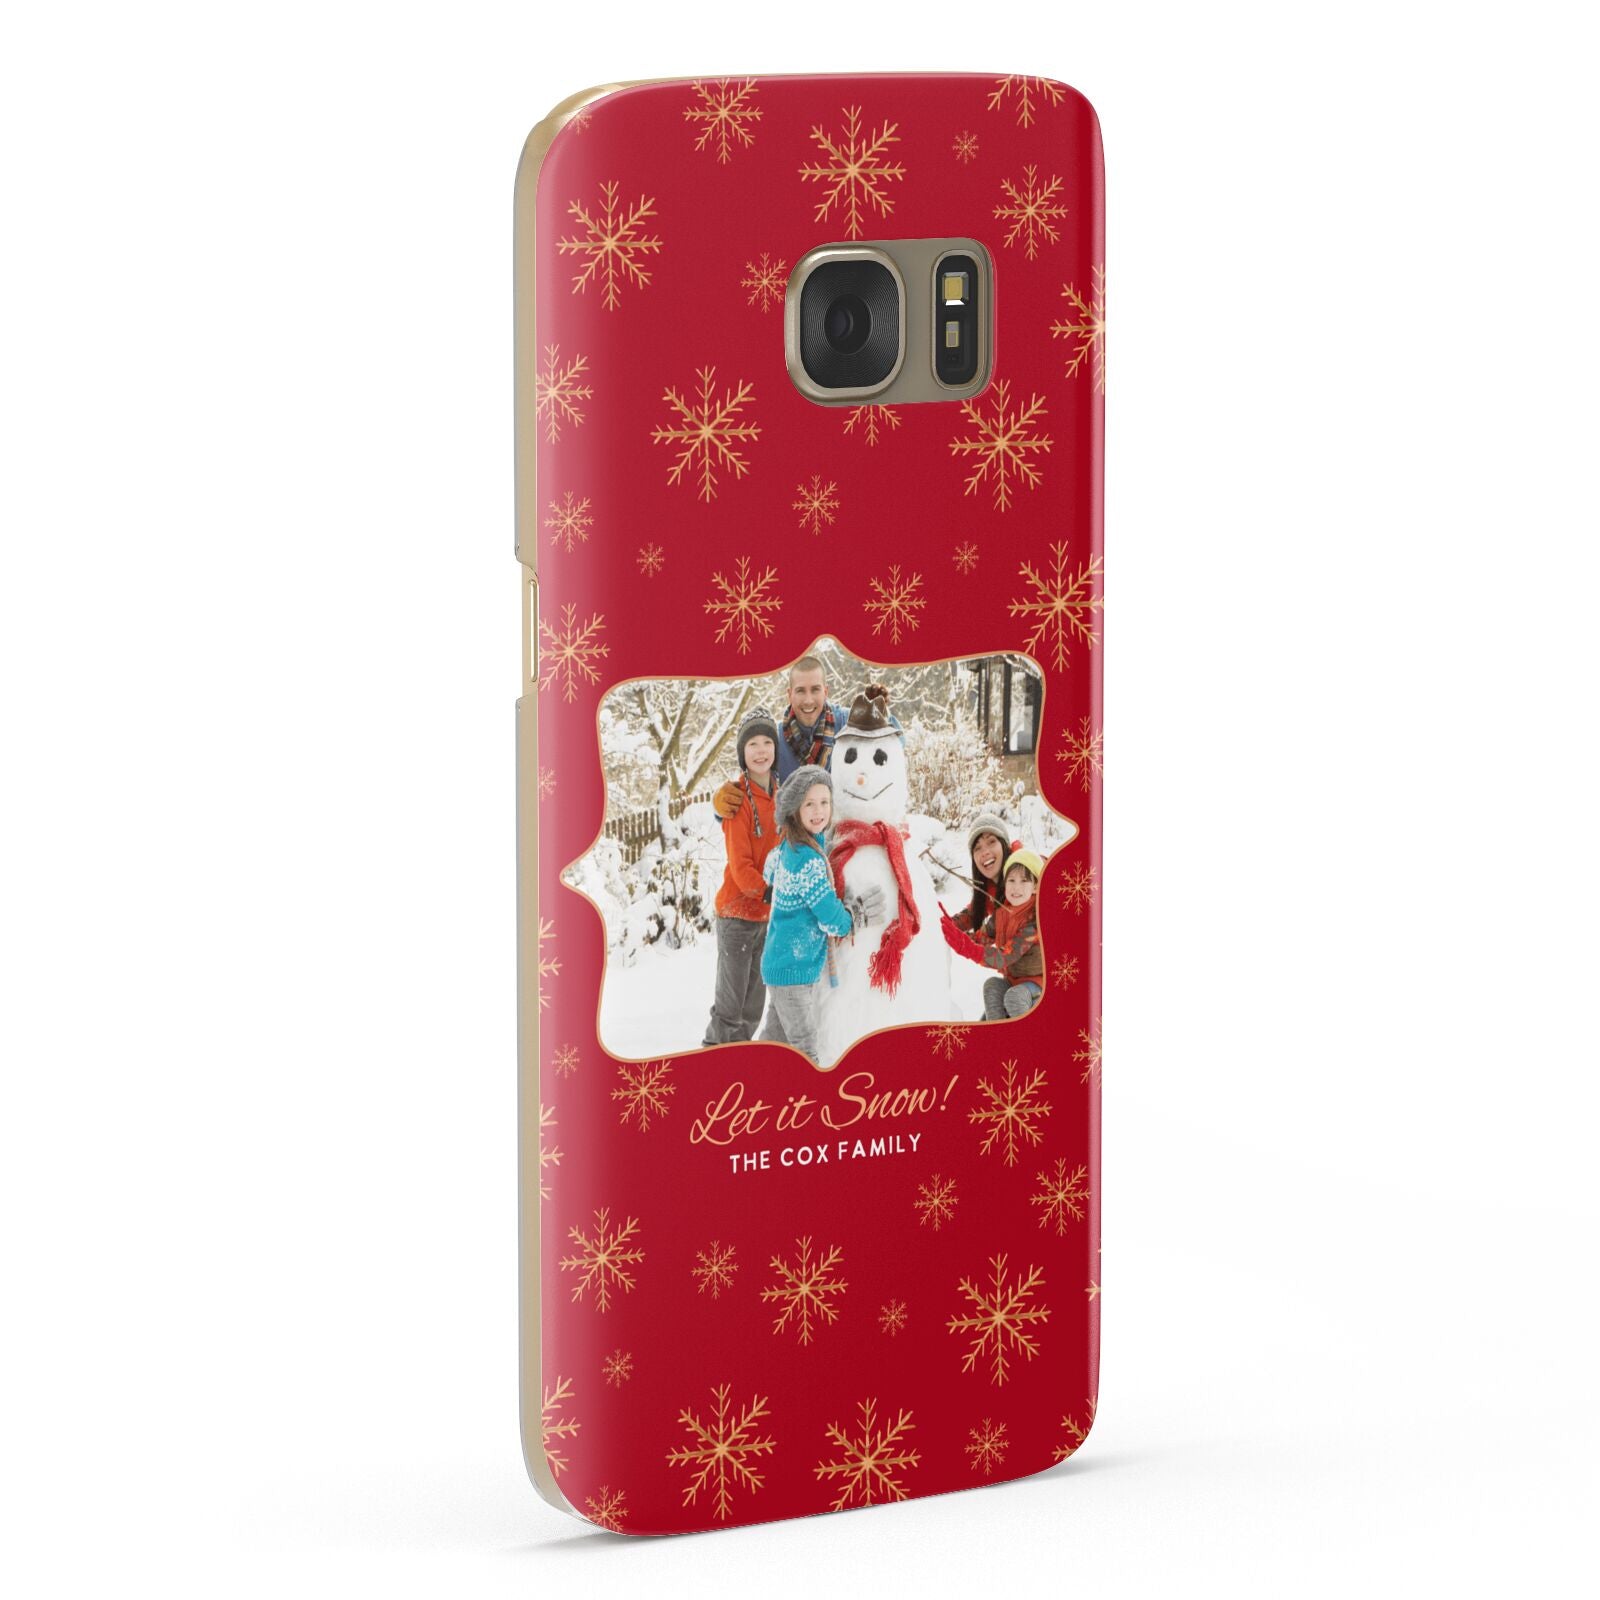 Let it Snow Christmas Photo Upload Samsung Galaxy Case Fourty Five Degrees